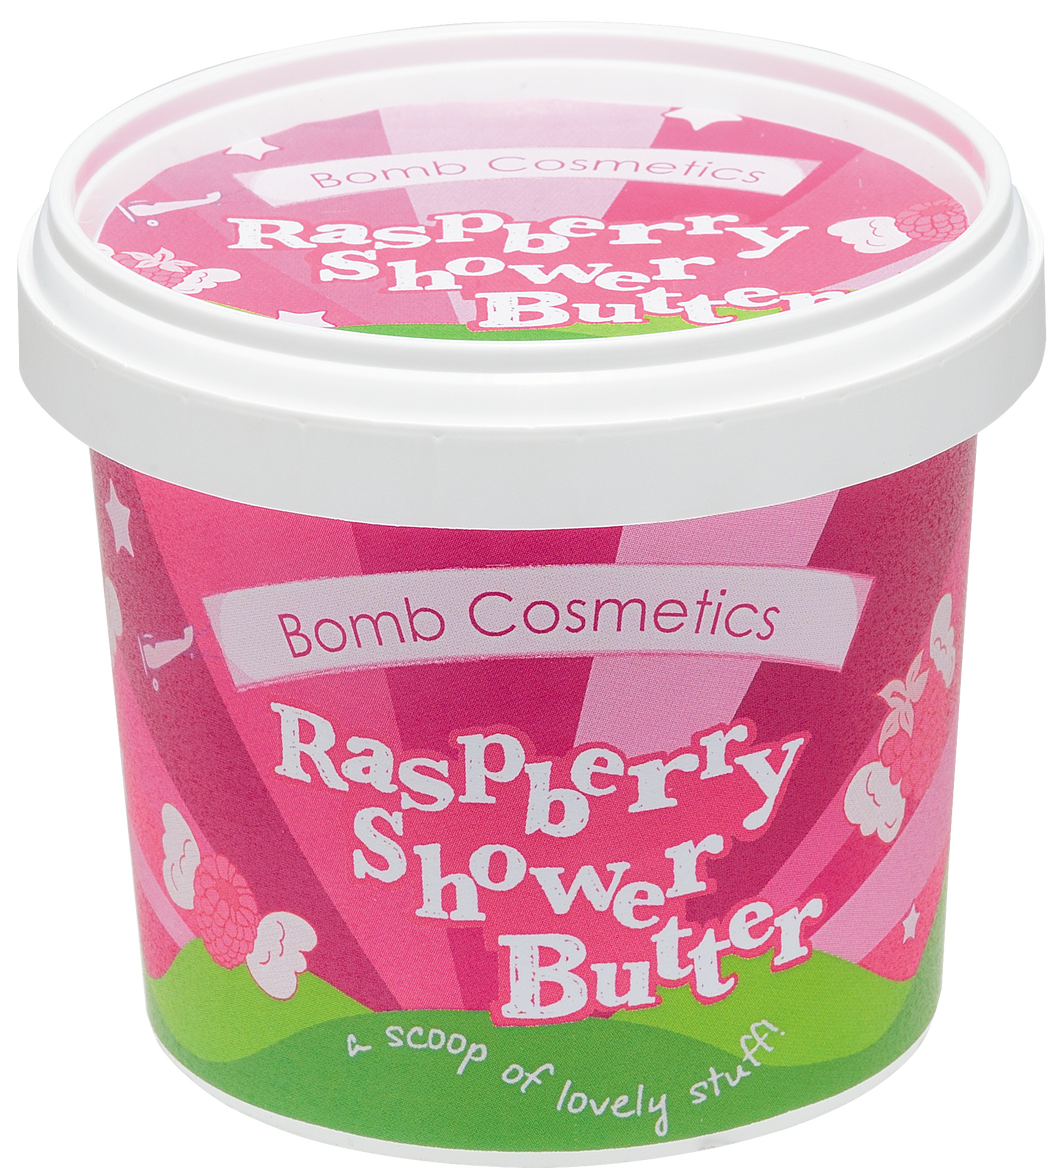 Raspberry Cleansing Shower Butter